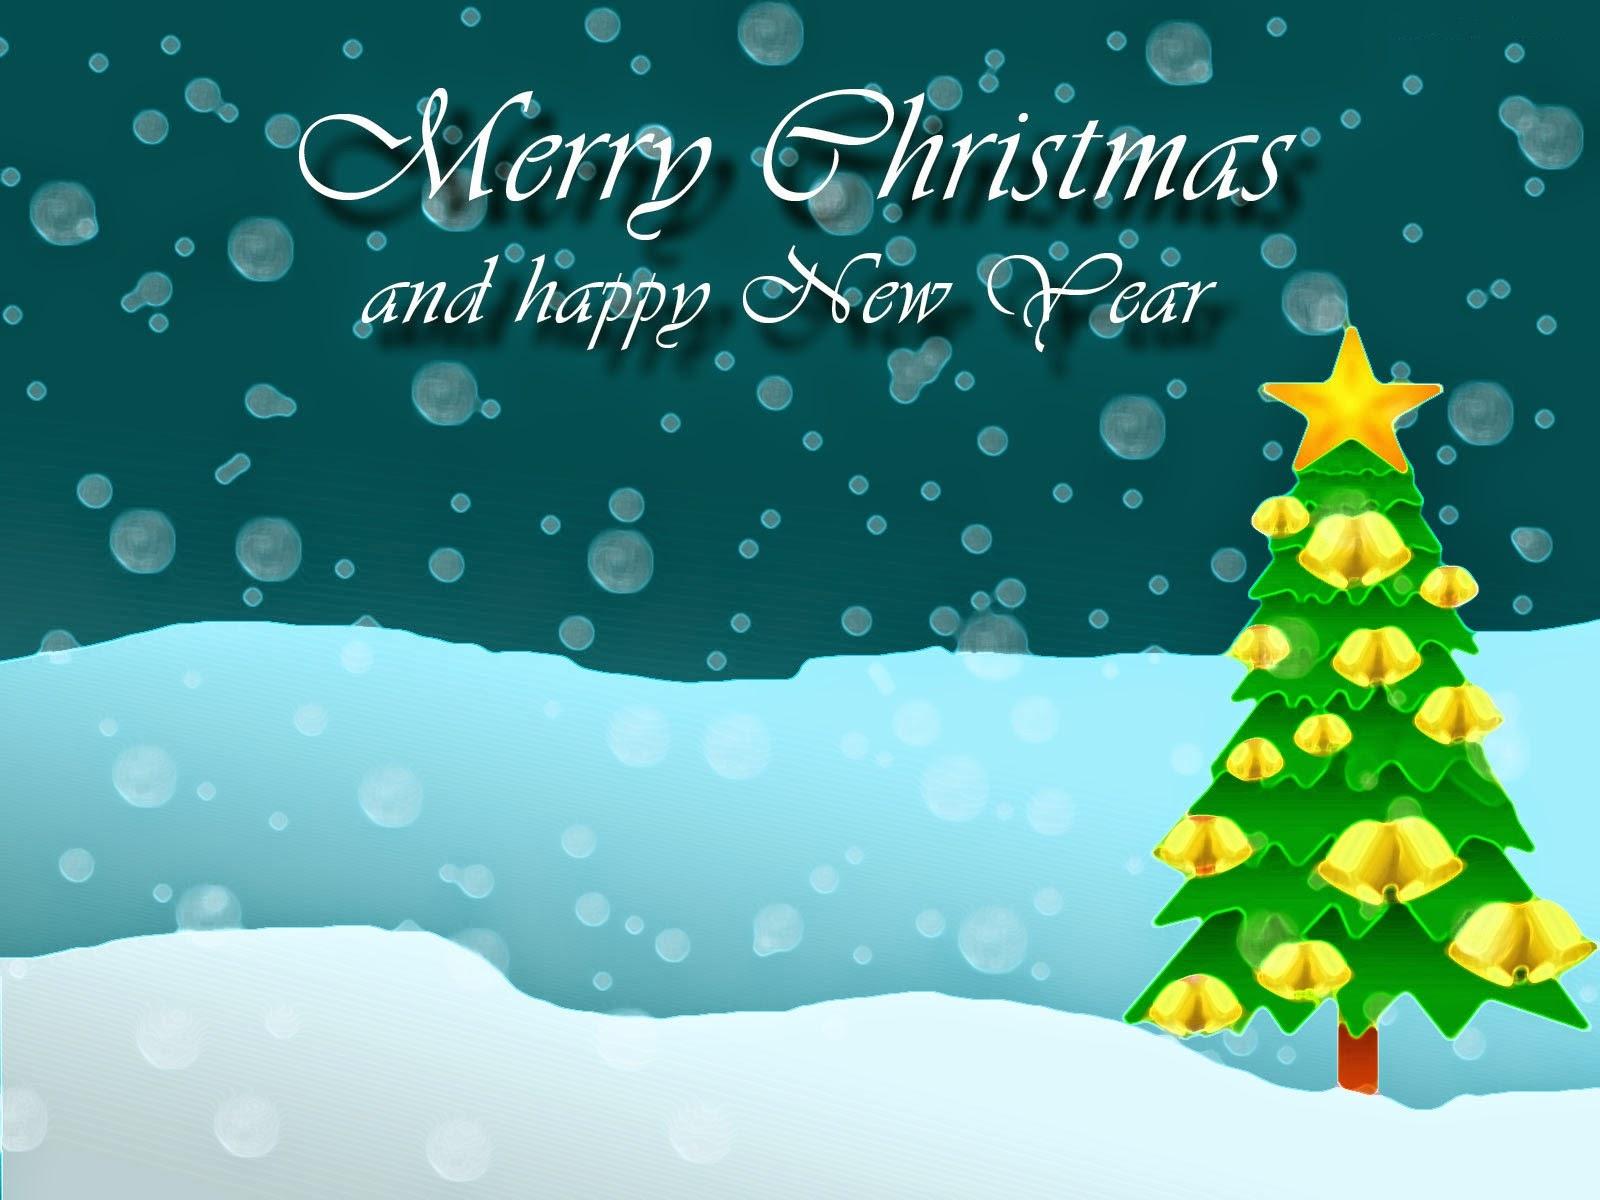 Merry Christmas 2020 and Happy new Year 2021